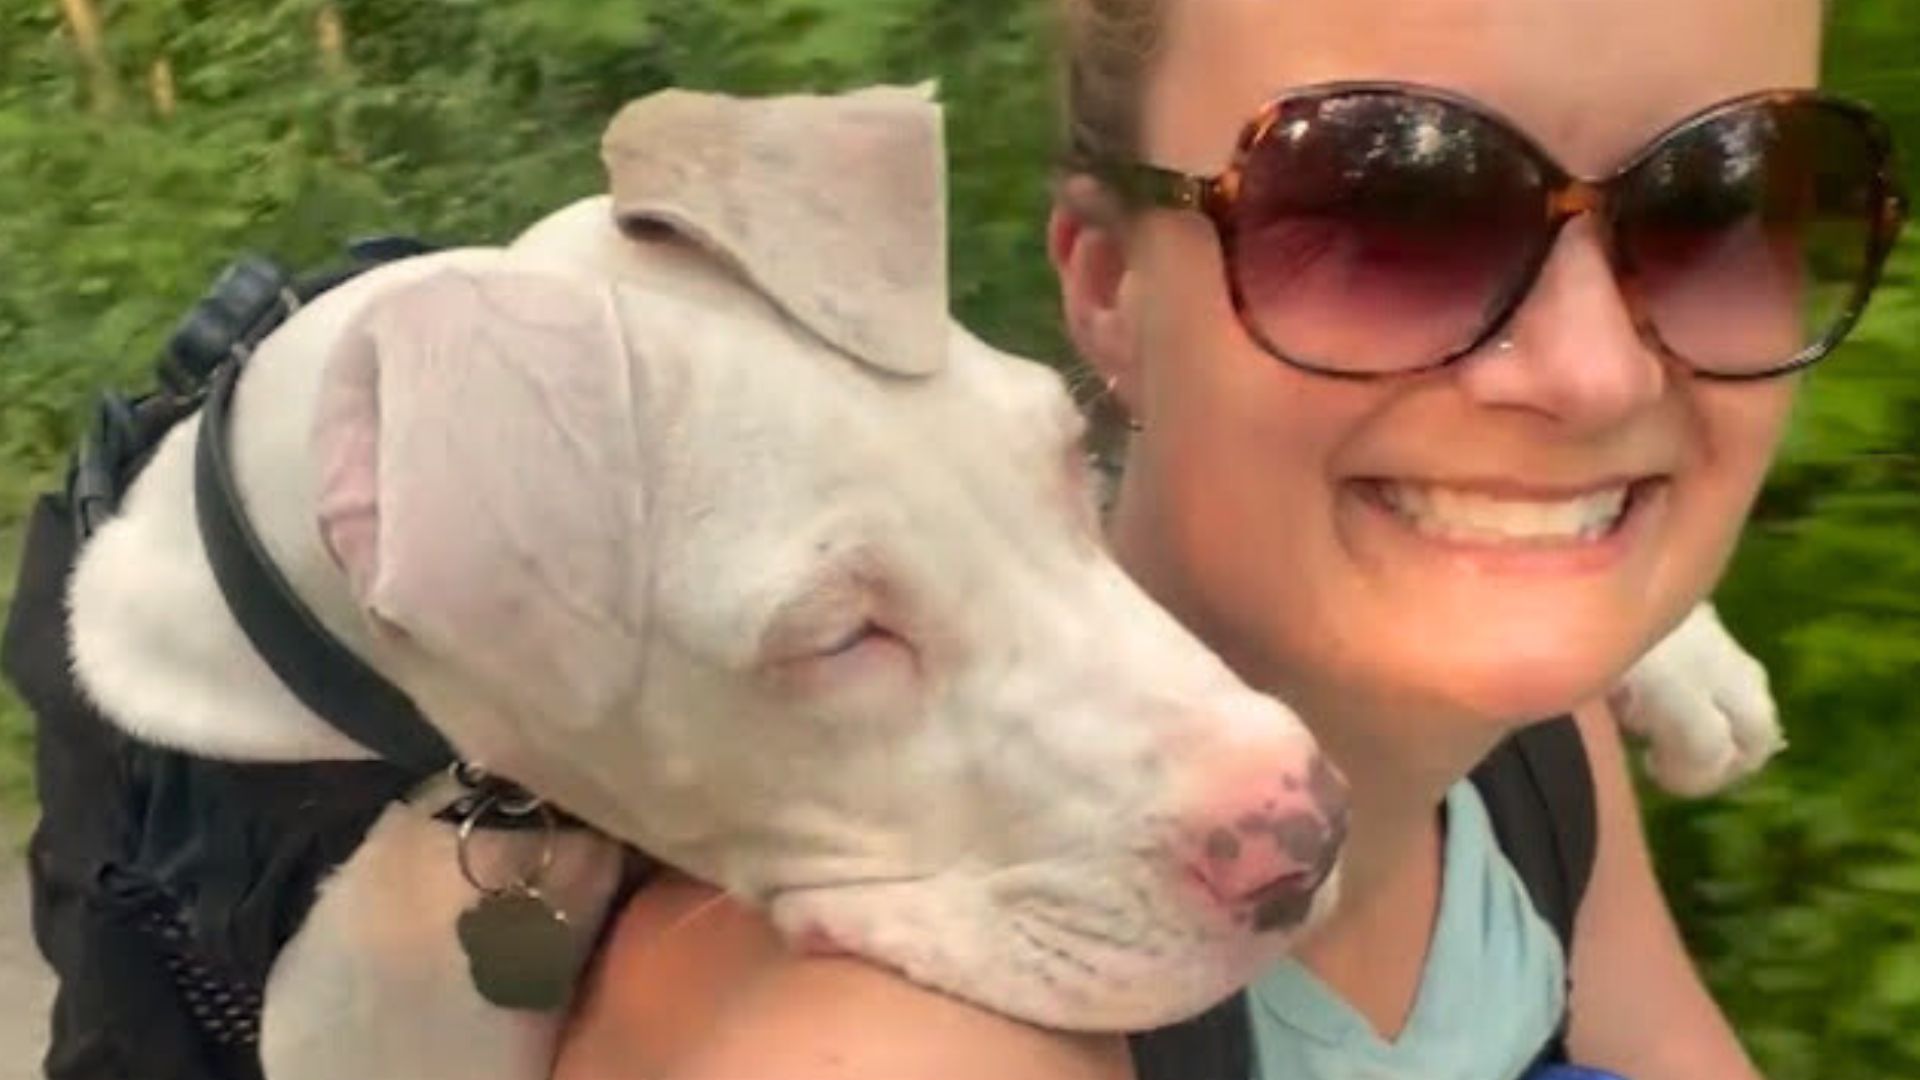 A Deaf Dog That Was Born “By Mistake” Becomes The Greatest Joy Of His New Family